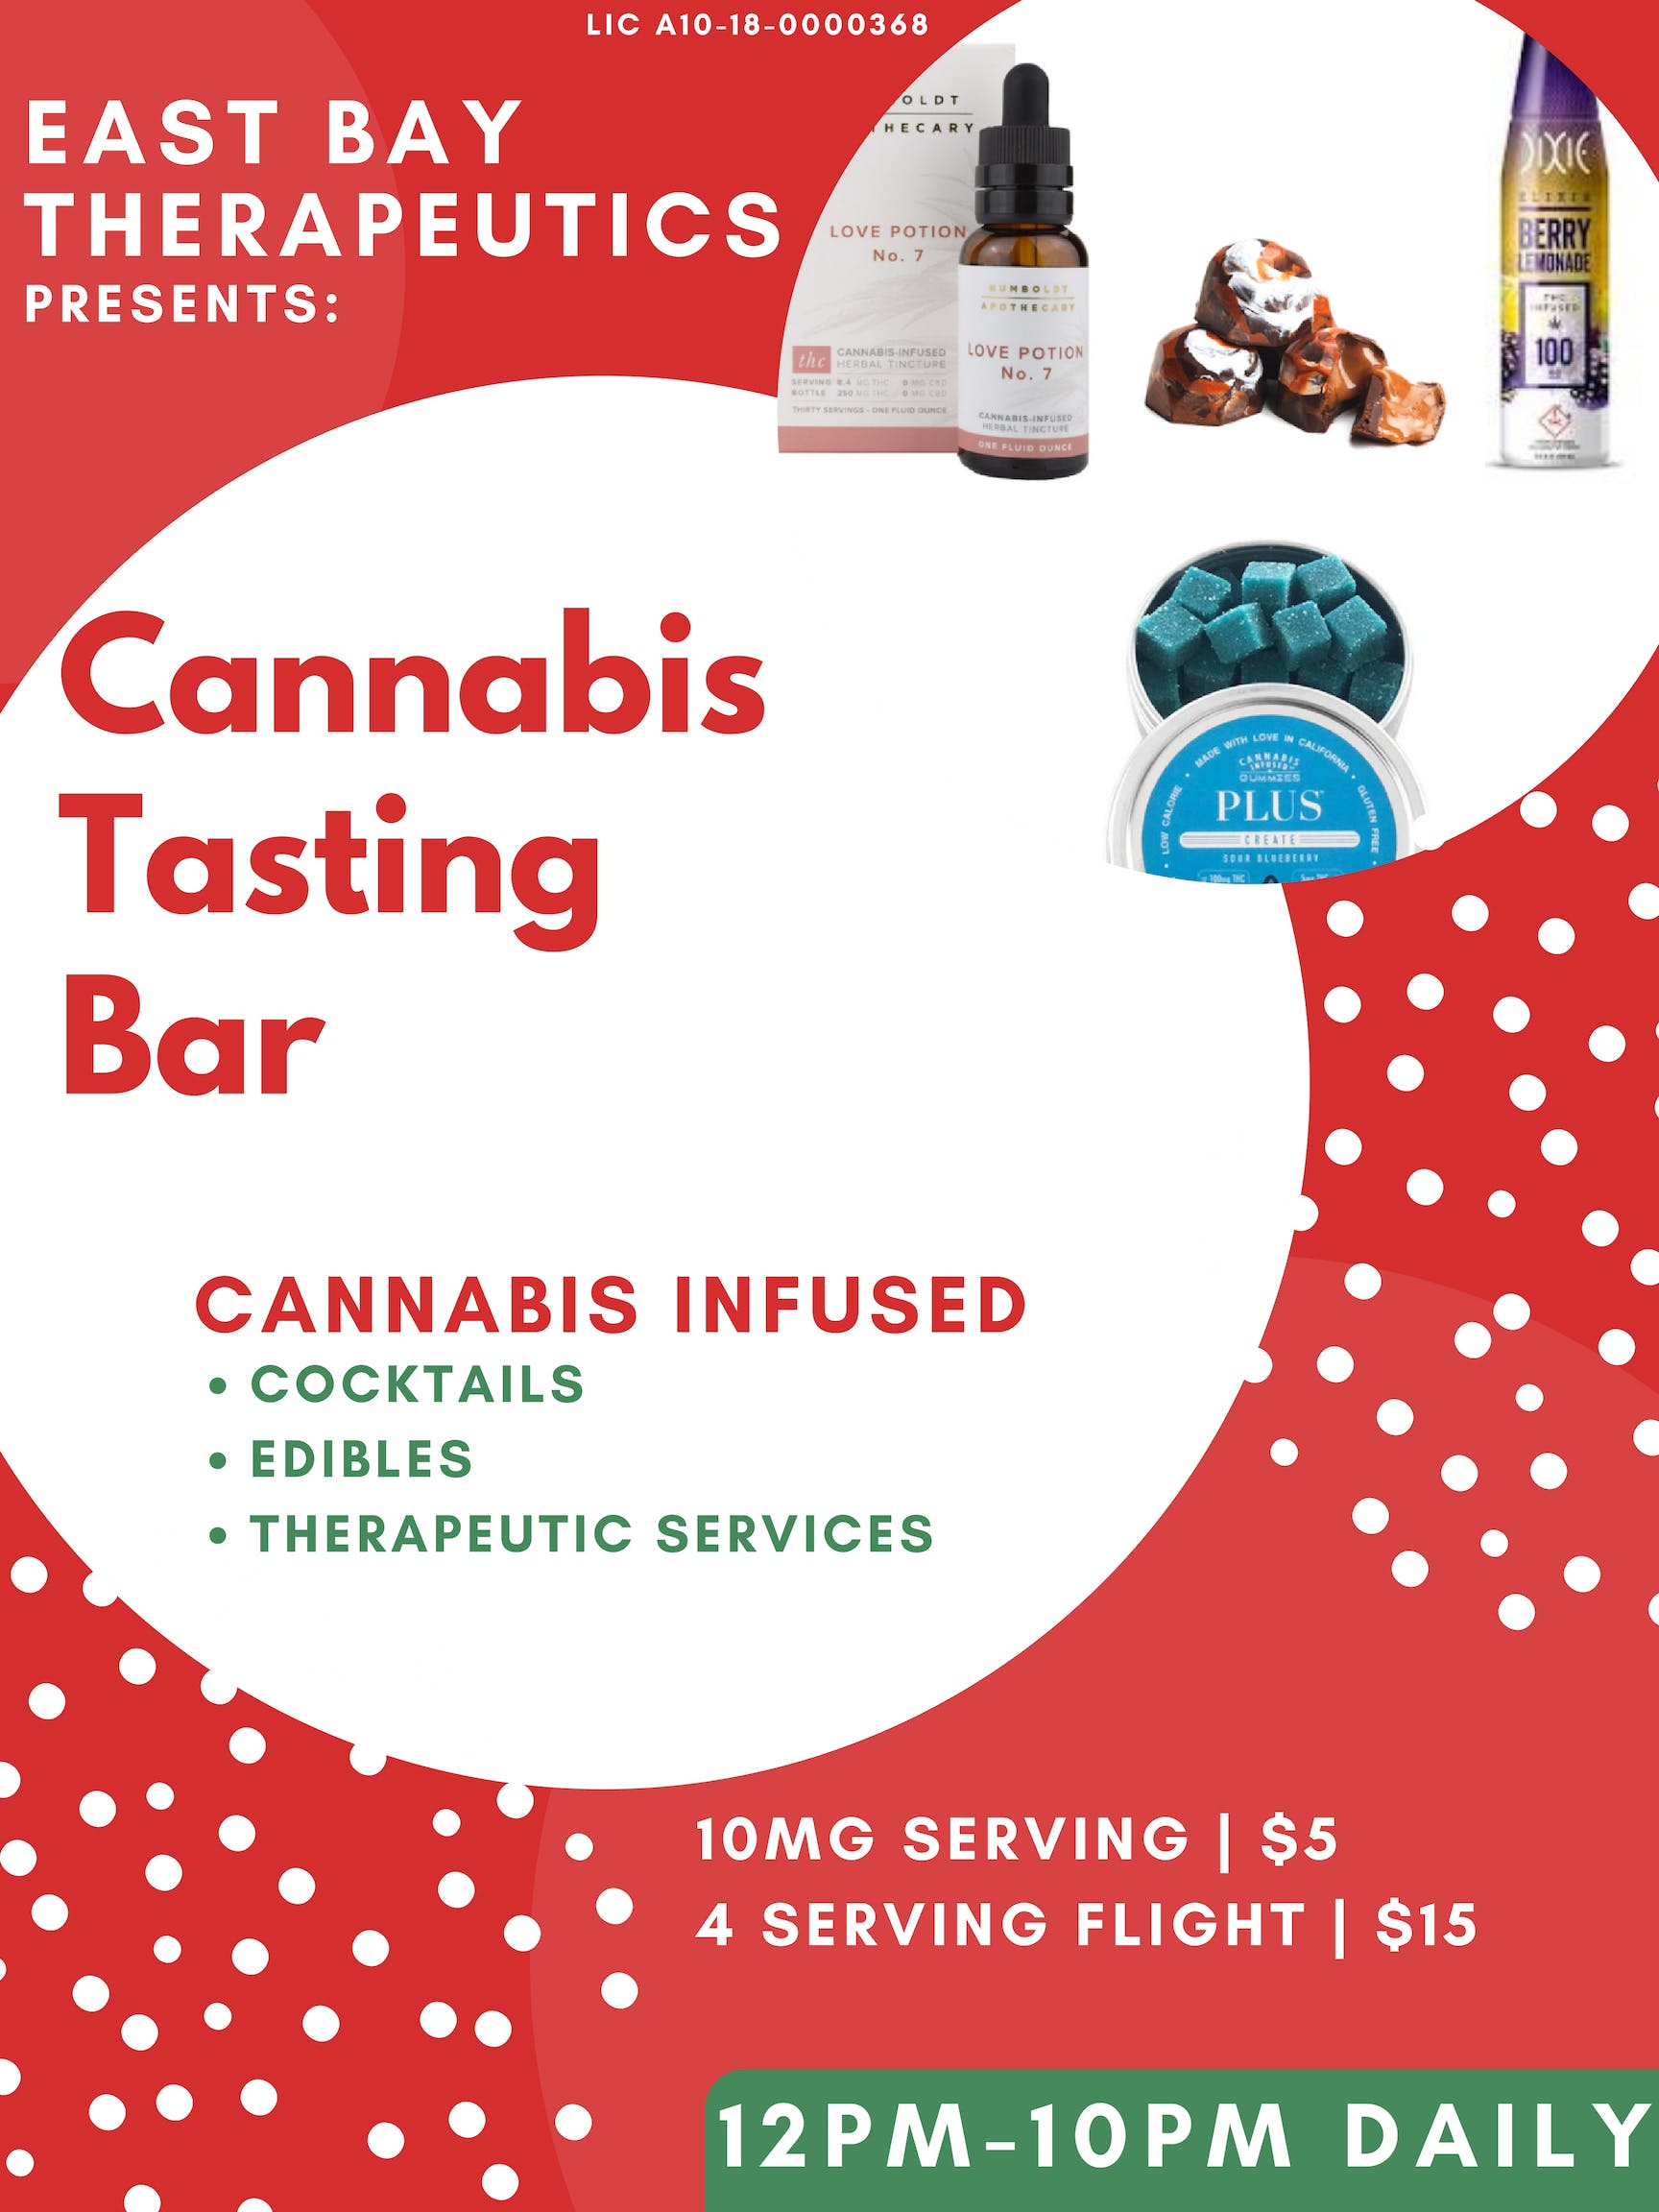 indica-cannabis-tasting-bar-open-now-40-east-bay-therapeutics